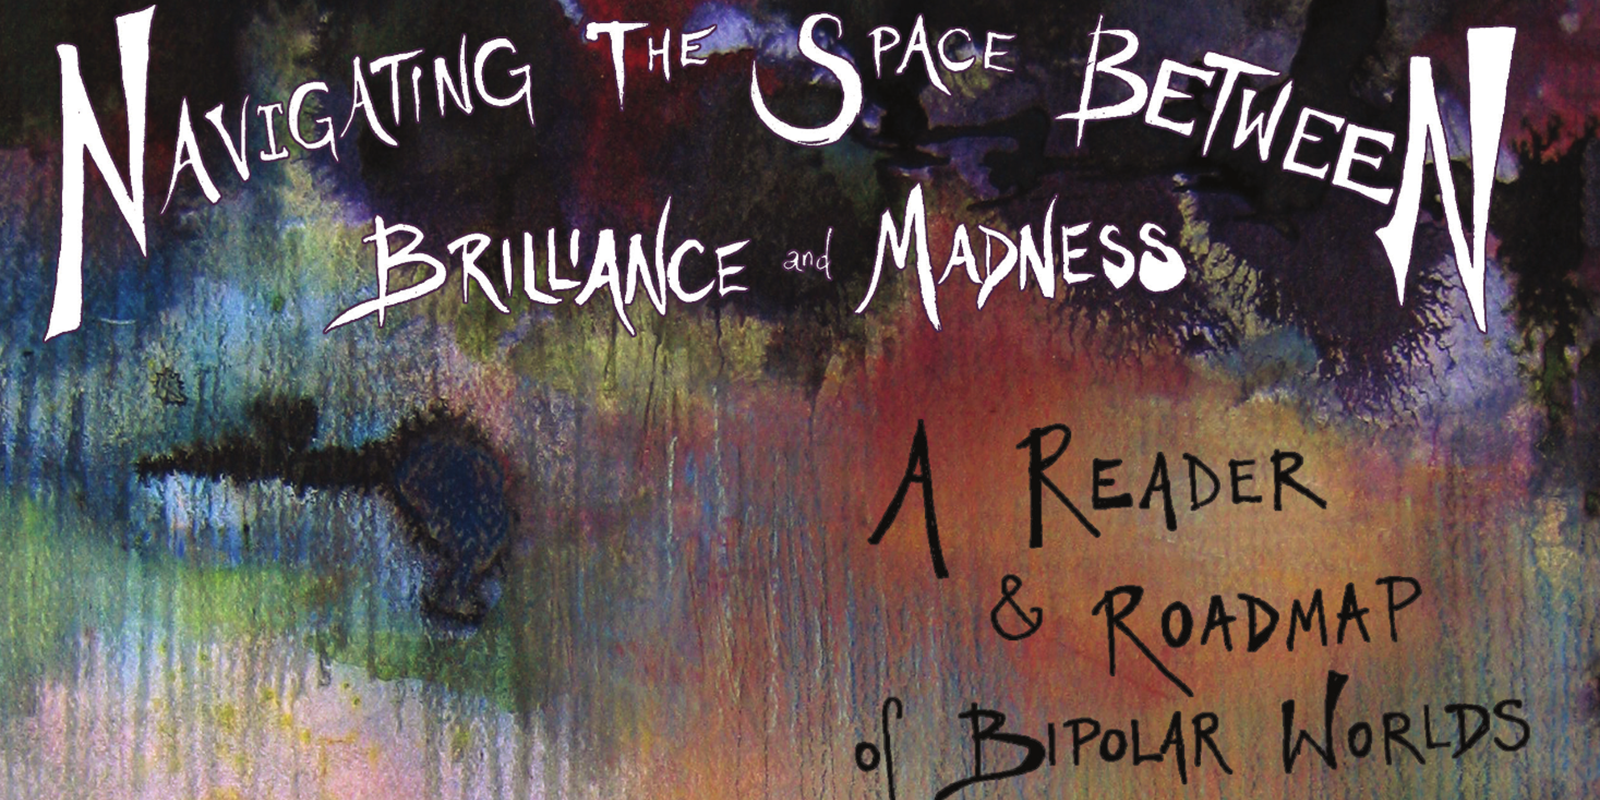 Navigating The Space Between Brilliance And Madness: A Reader & Roadmap Of Bipolar Worlds